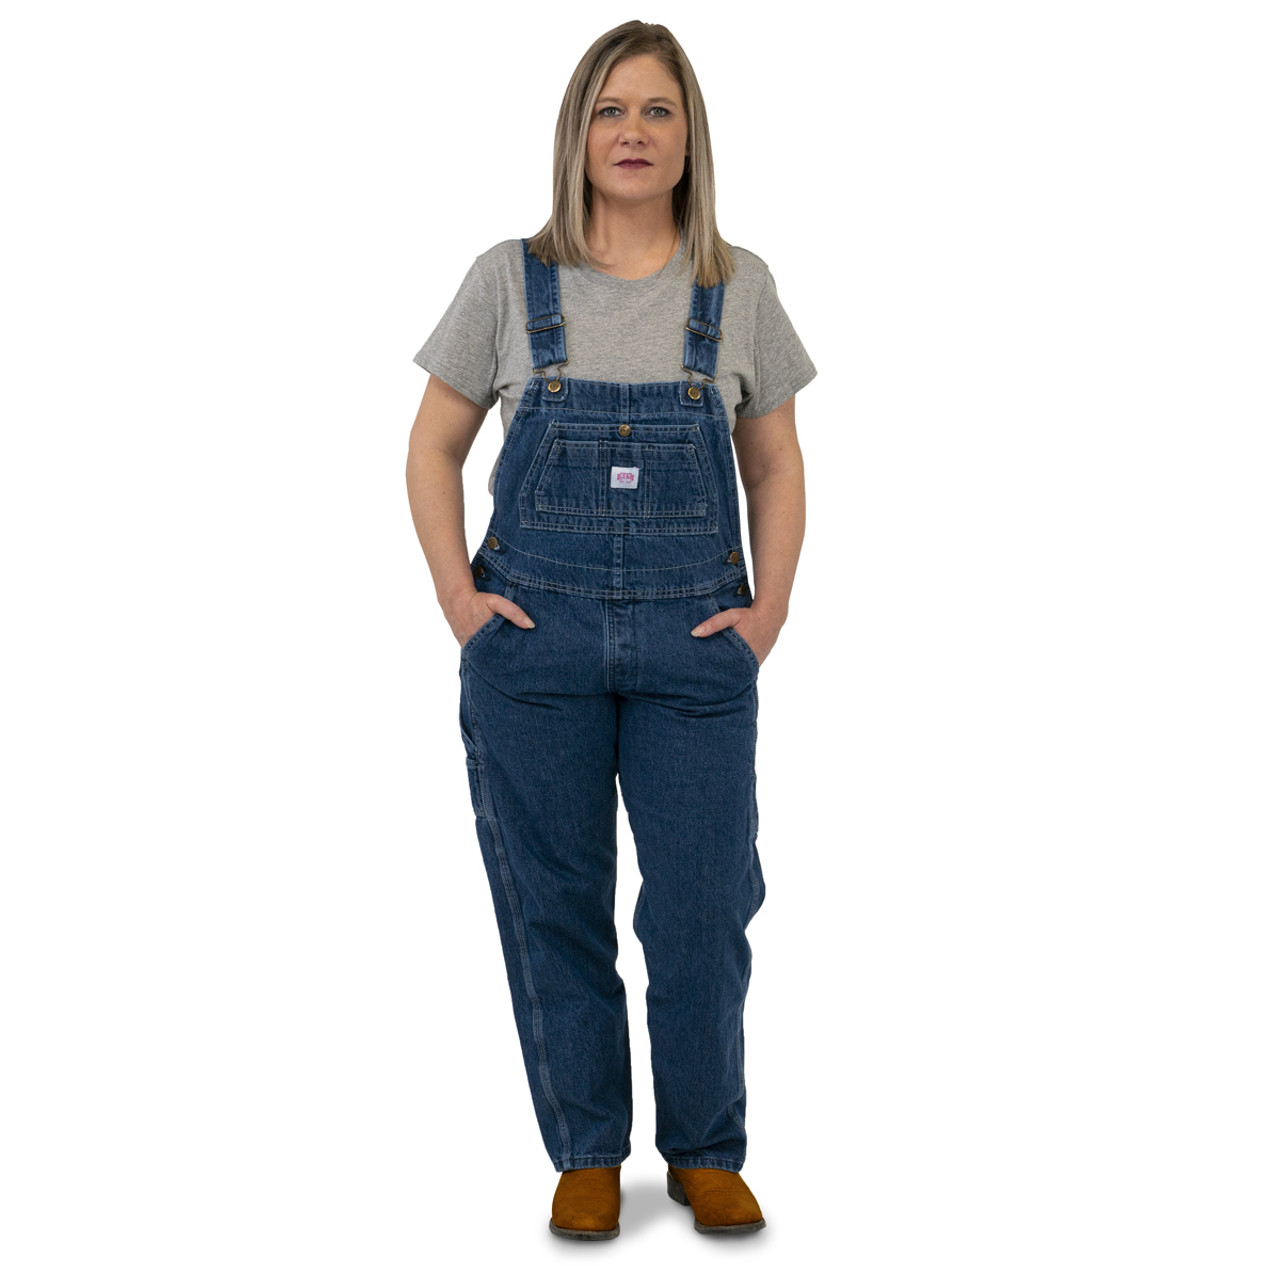 Dreamer Printed Dungarees, Womens Trousers